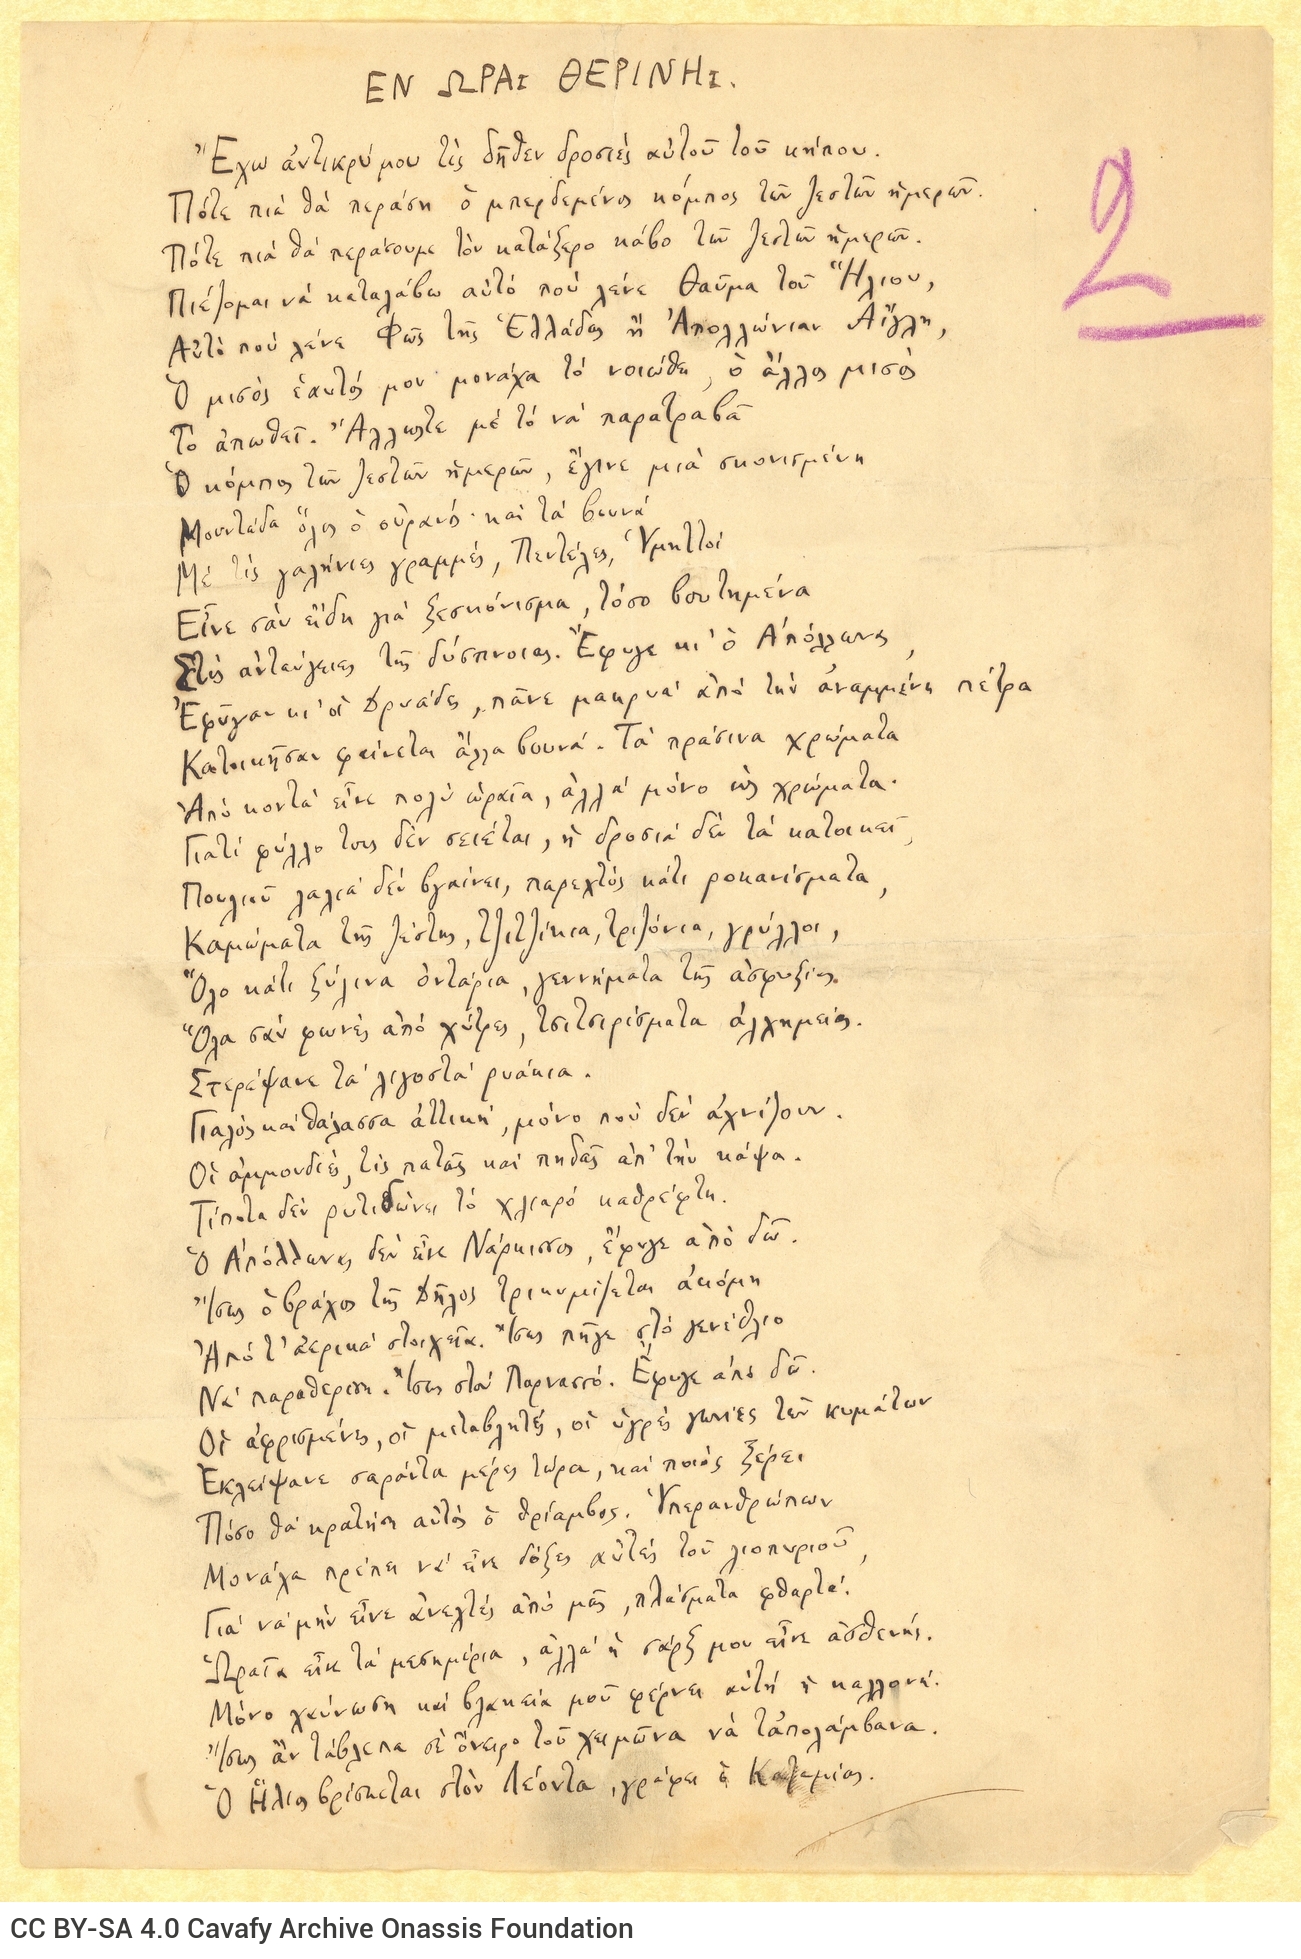 Manuscript of the poem "En ora therini", on one side of three sheets. Number "2" on the first sheet. The second and third she